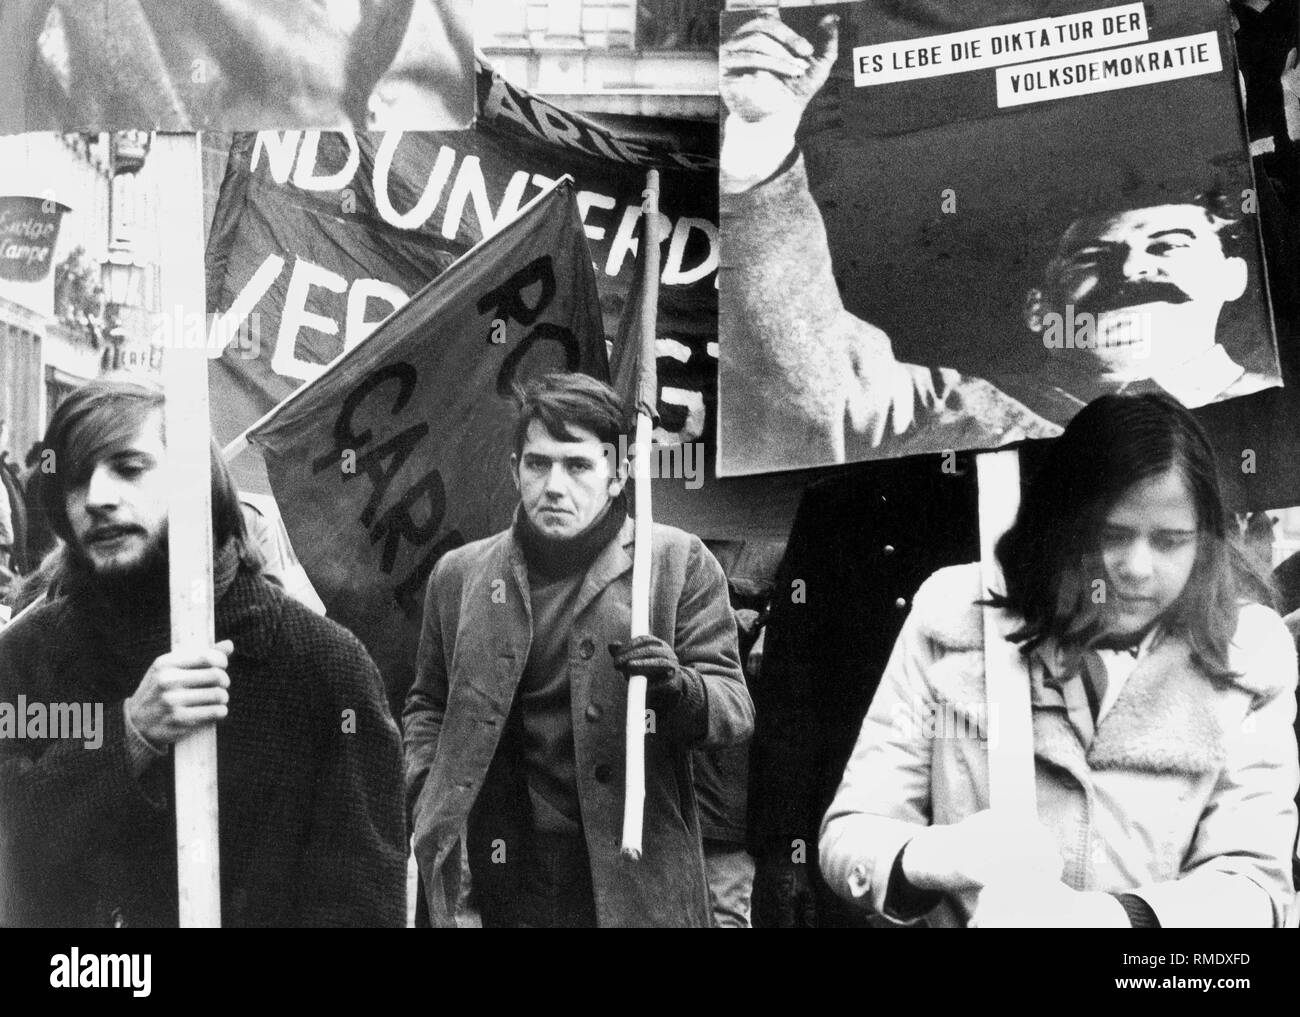 Students with banners in hands demonstrate in Munich. On the poster in front there is a portrait of Joseph Stalin. Stock Photo